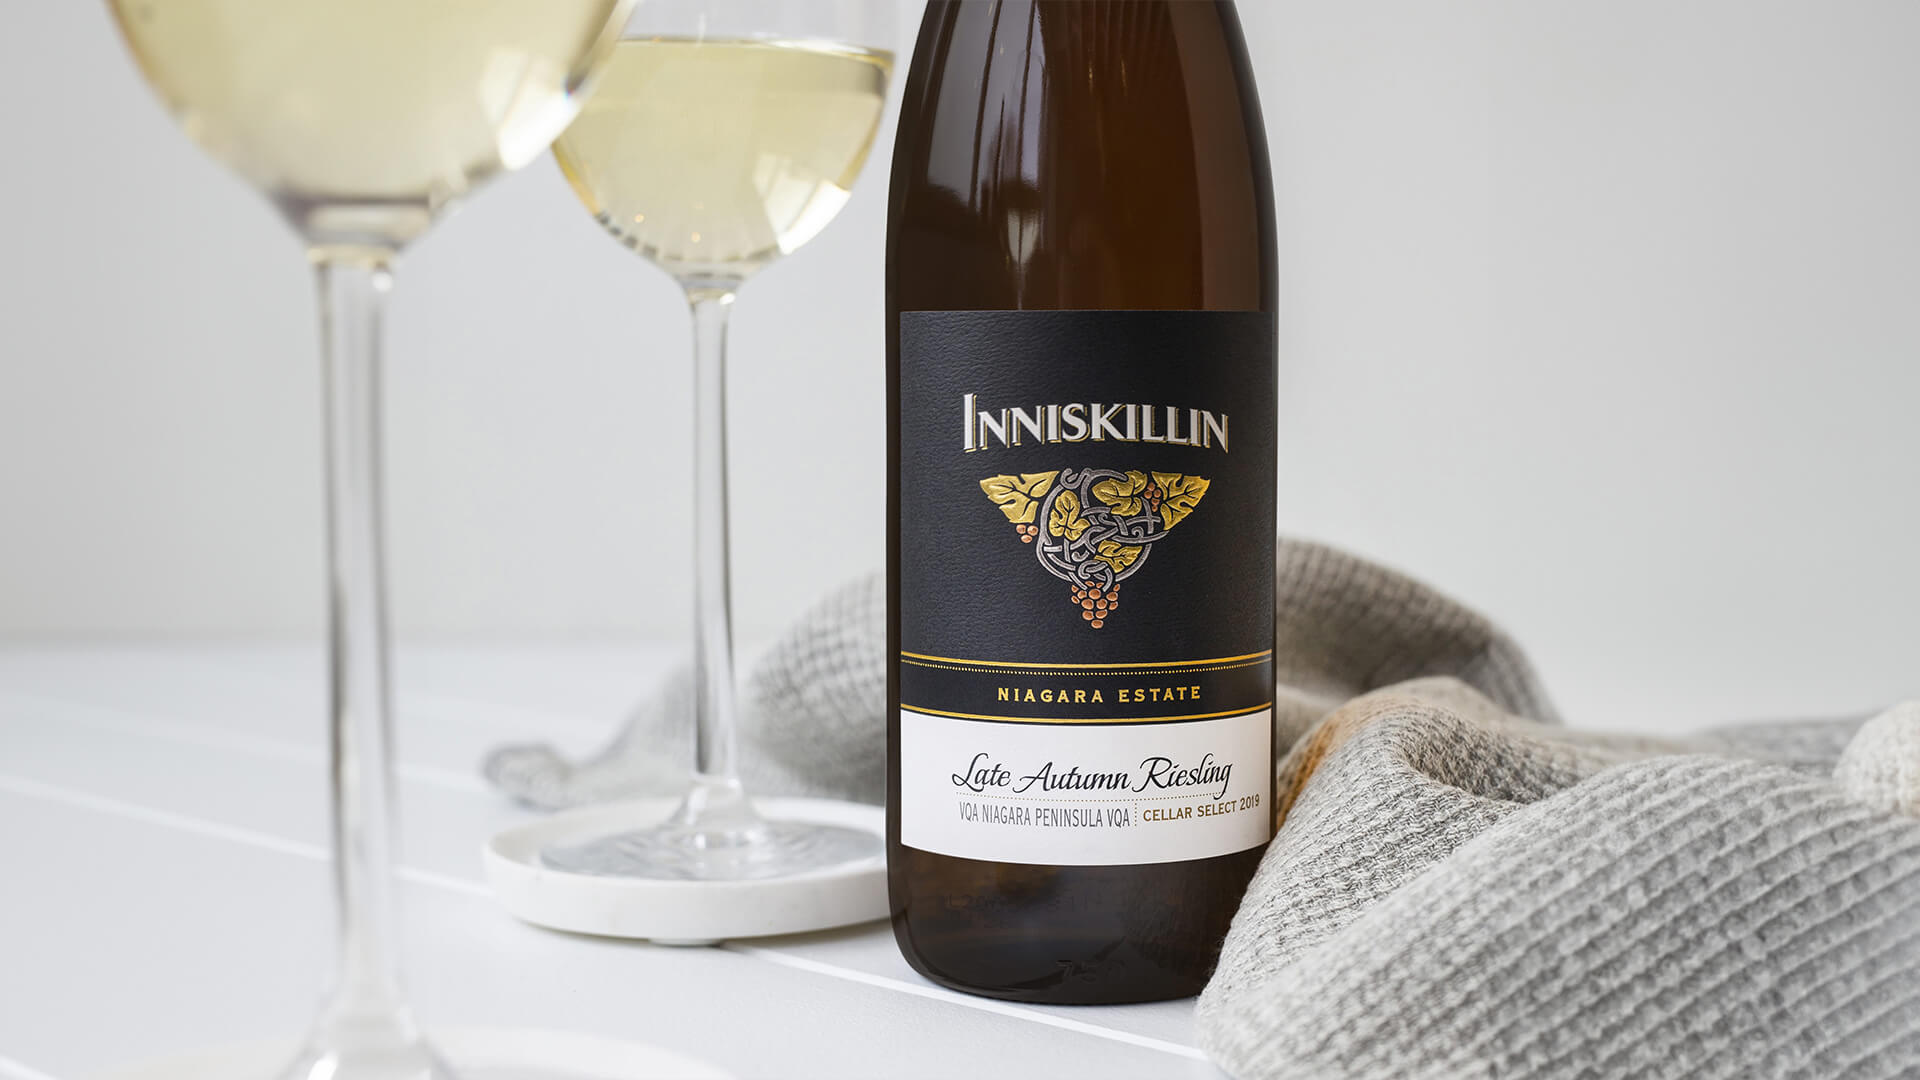 A bottle and glass of Inniskillin’s delicious Late Autumn Riesling.